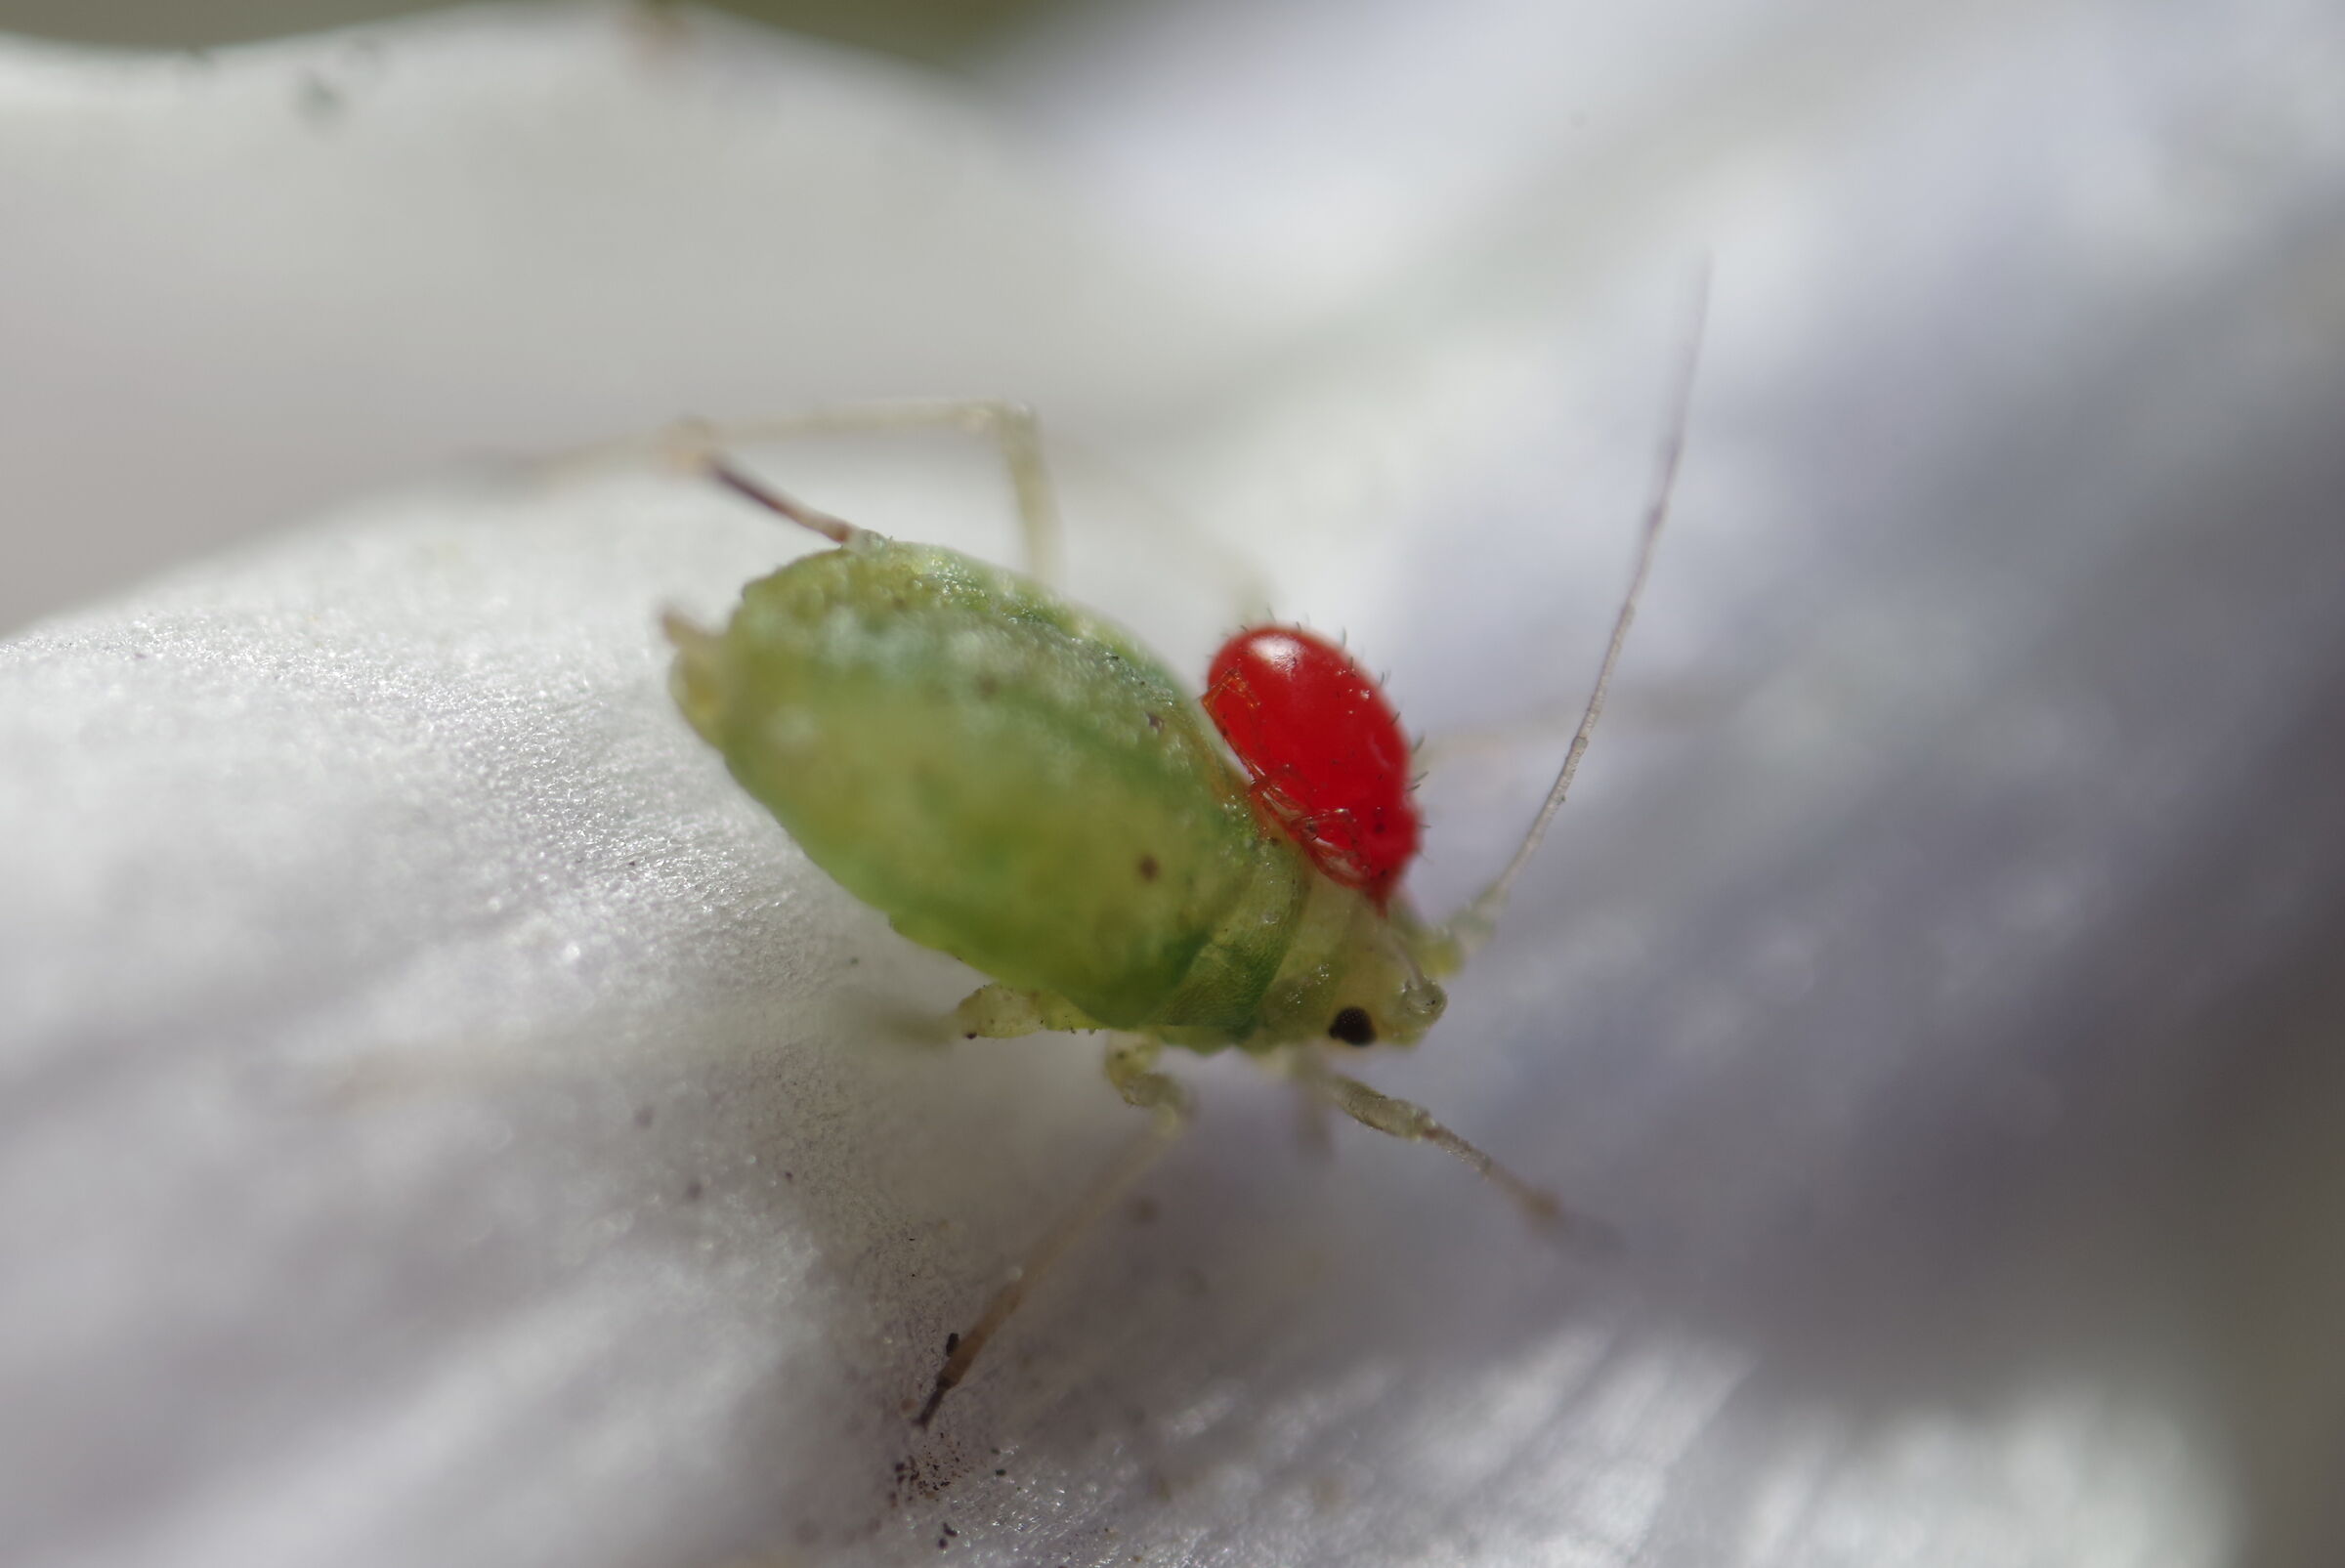 Aphid parasited by Mite...